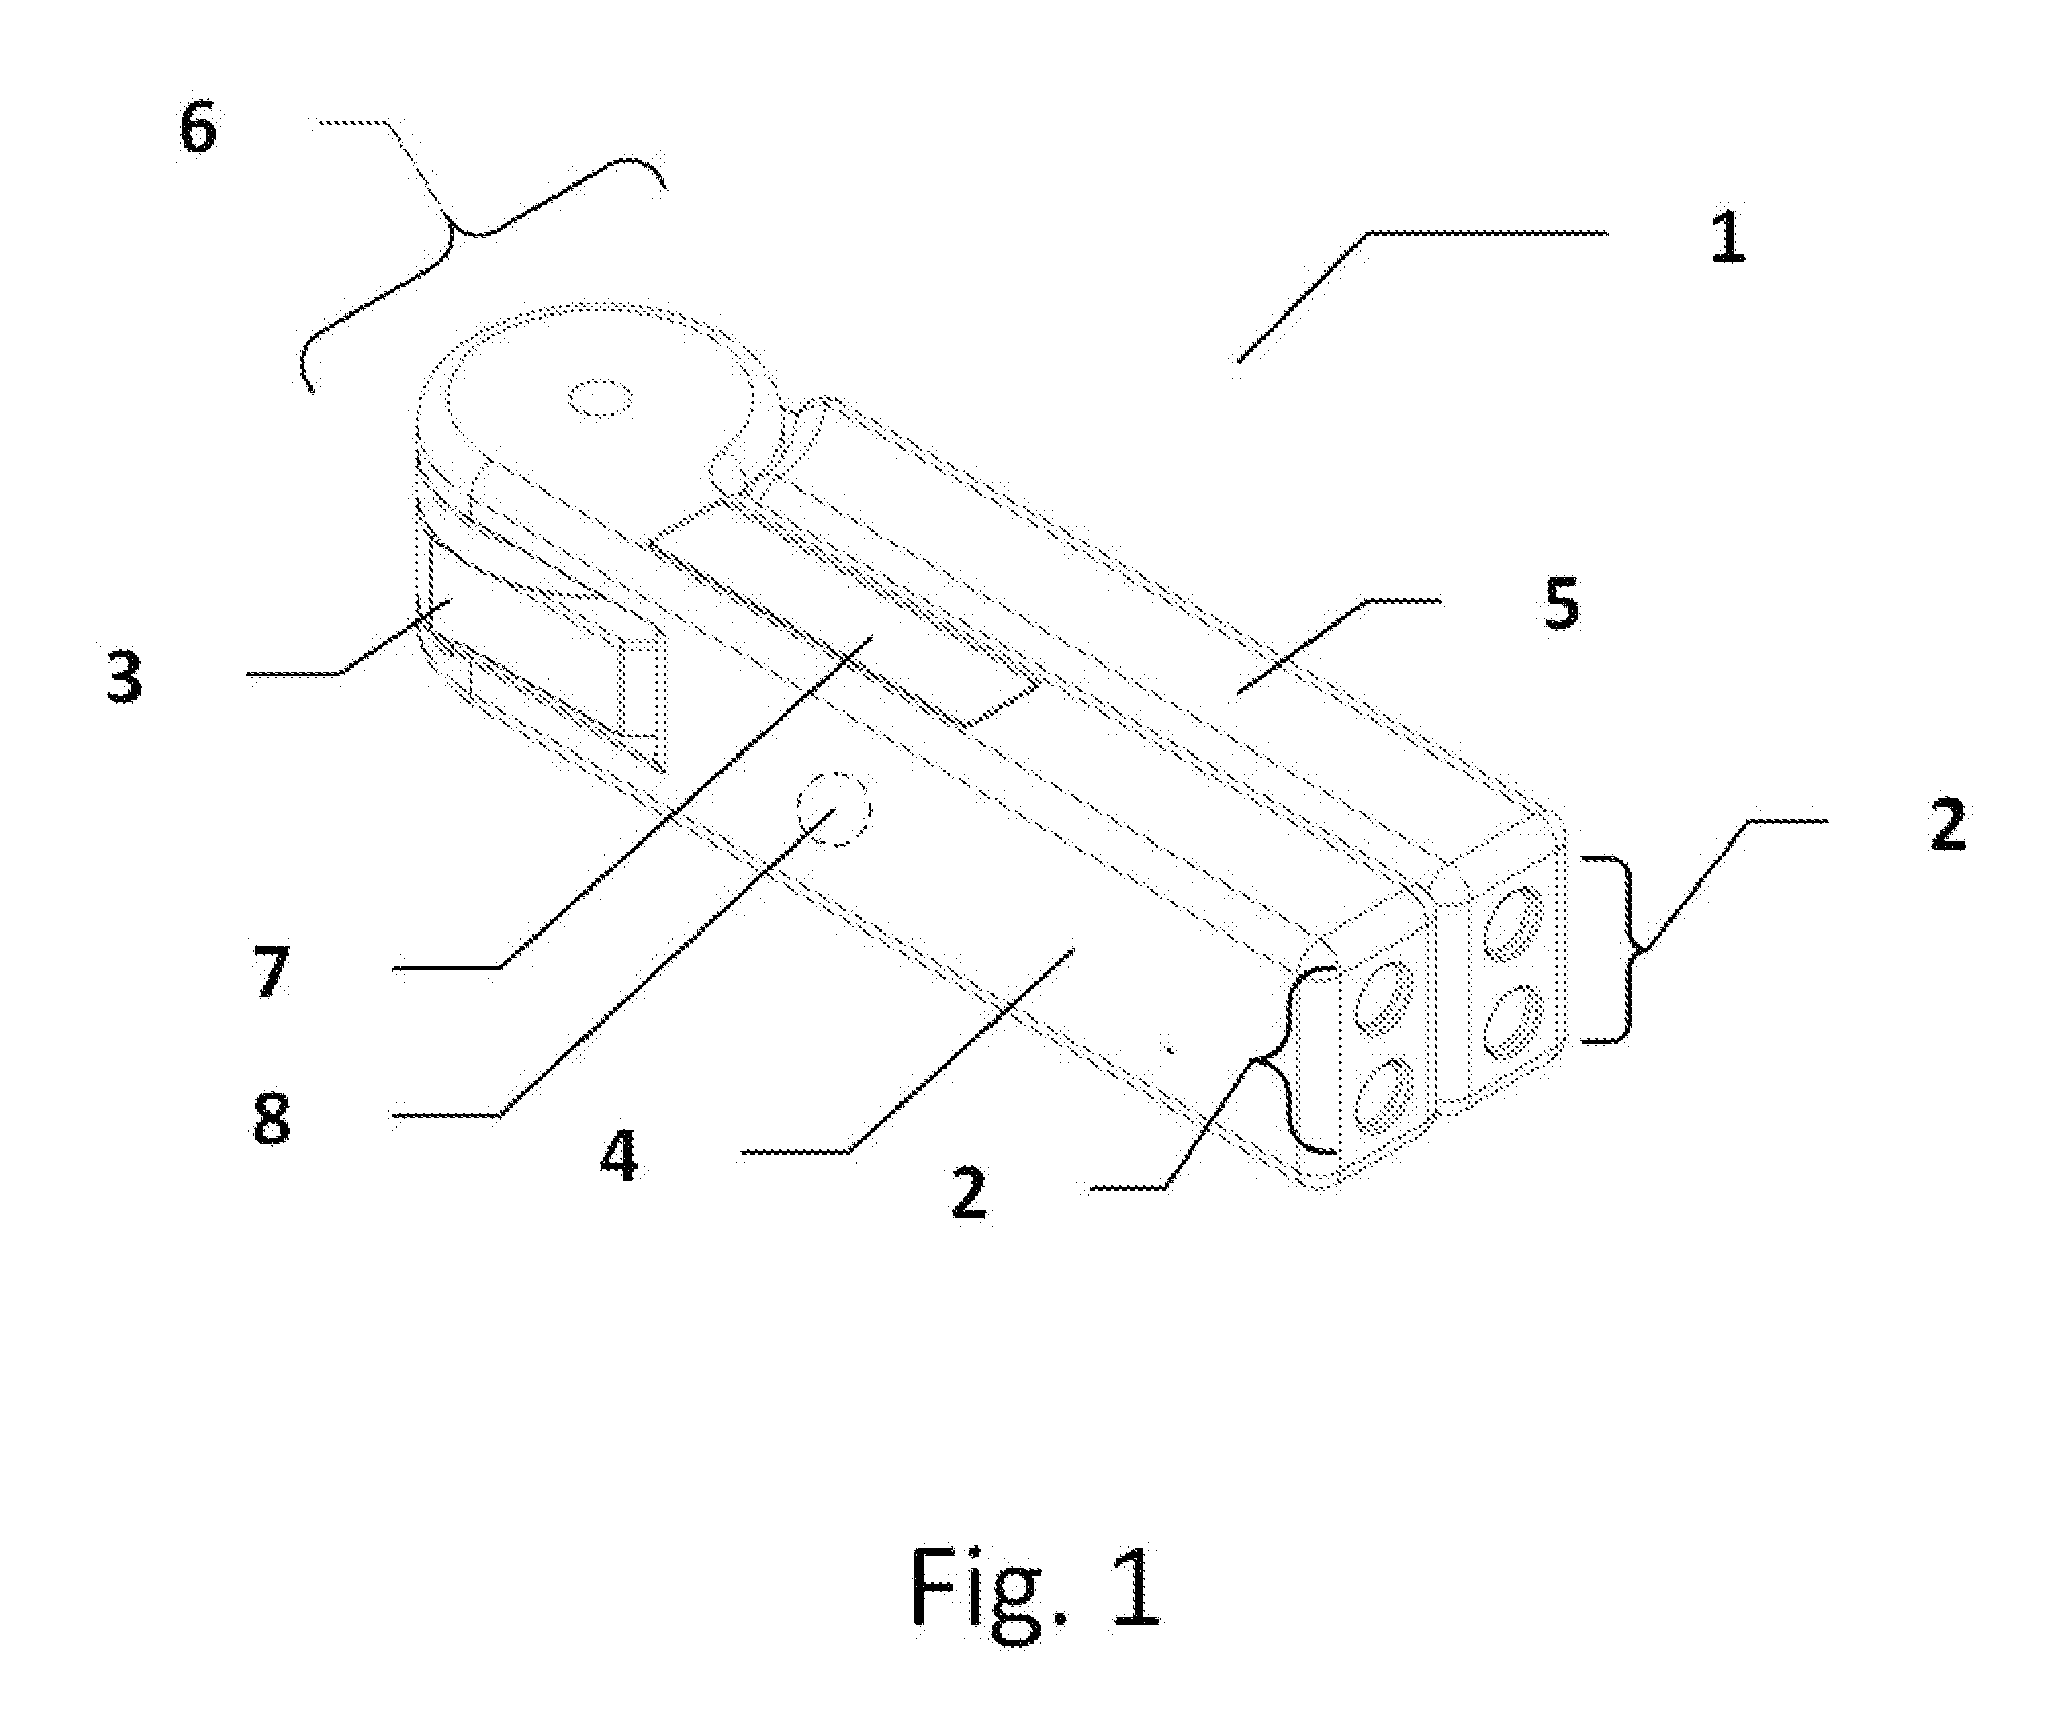 System and Method for Determination of Distance Between Two Points in 3-Dimensional Space